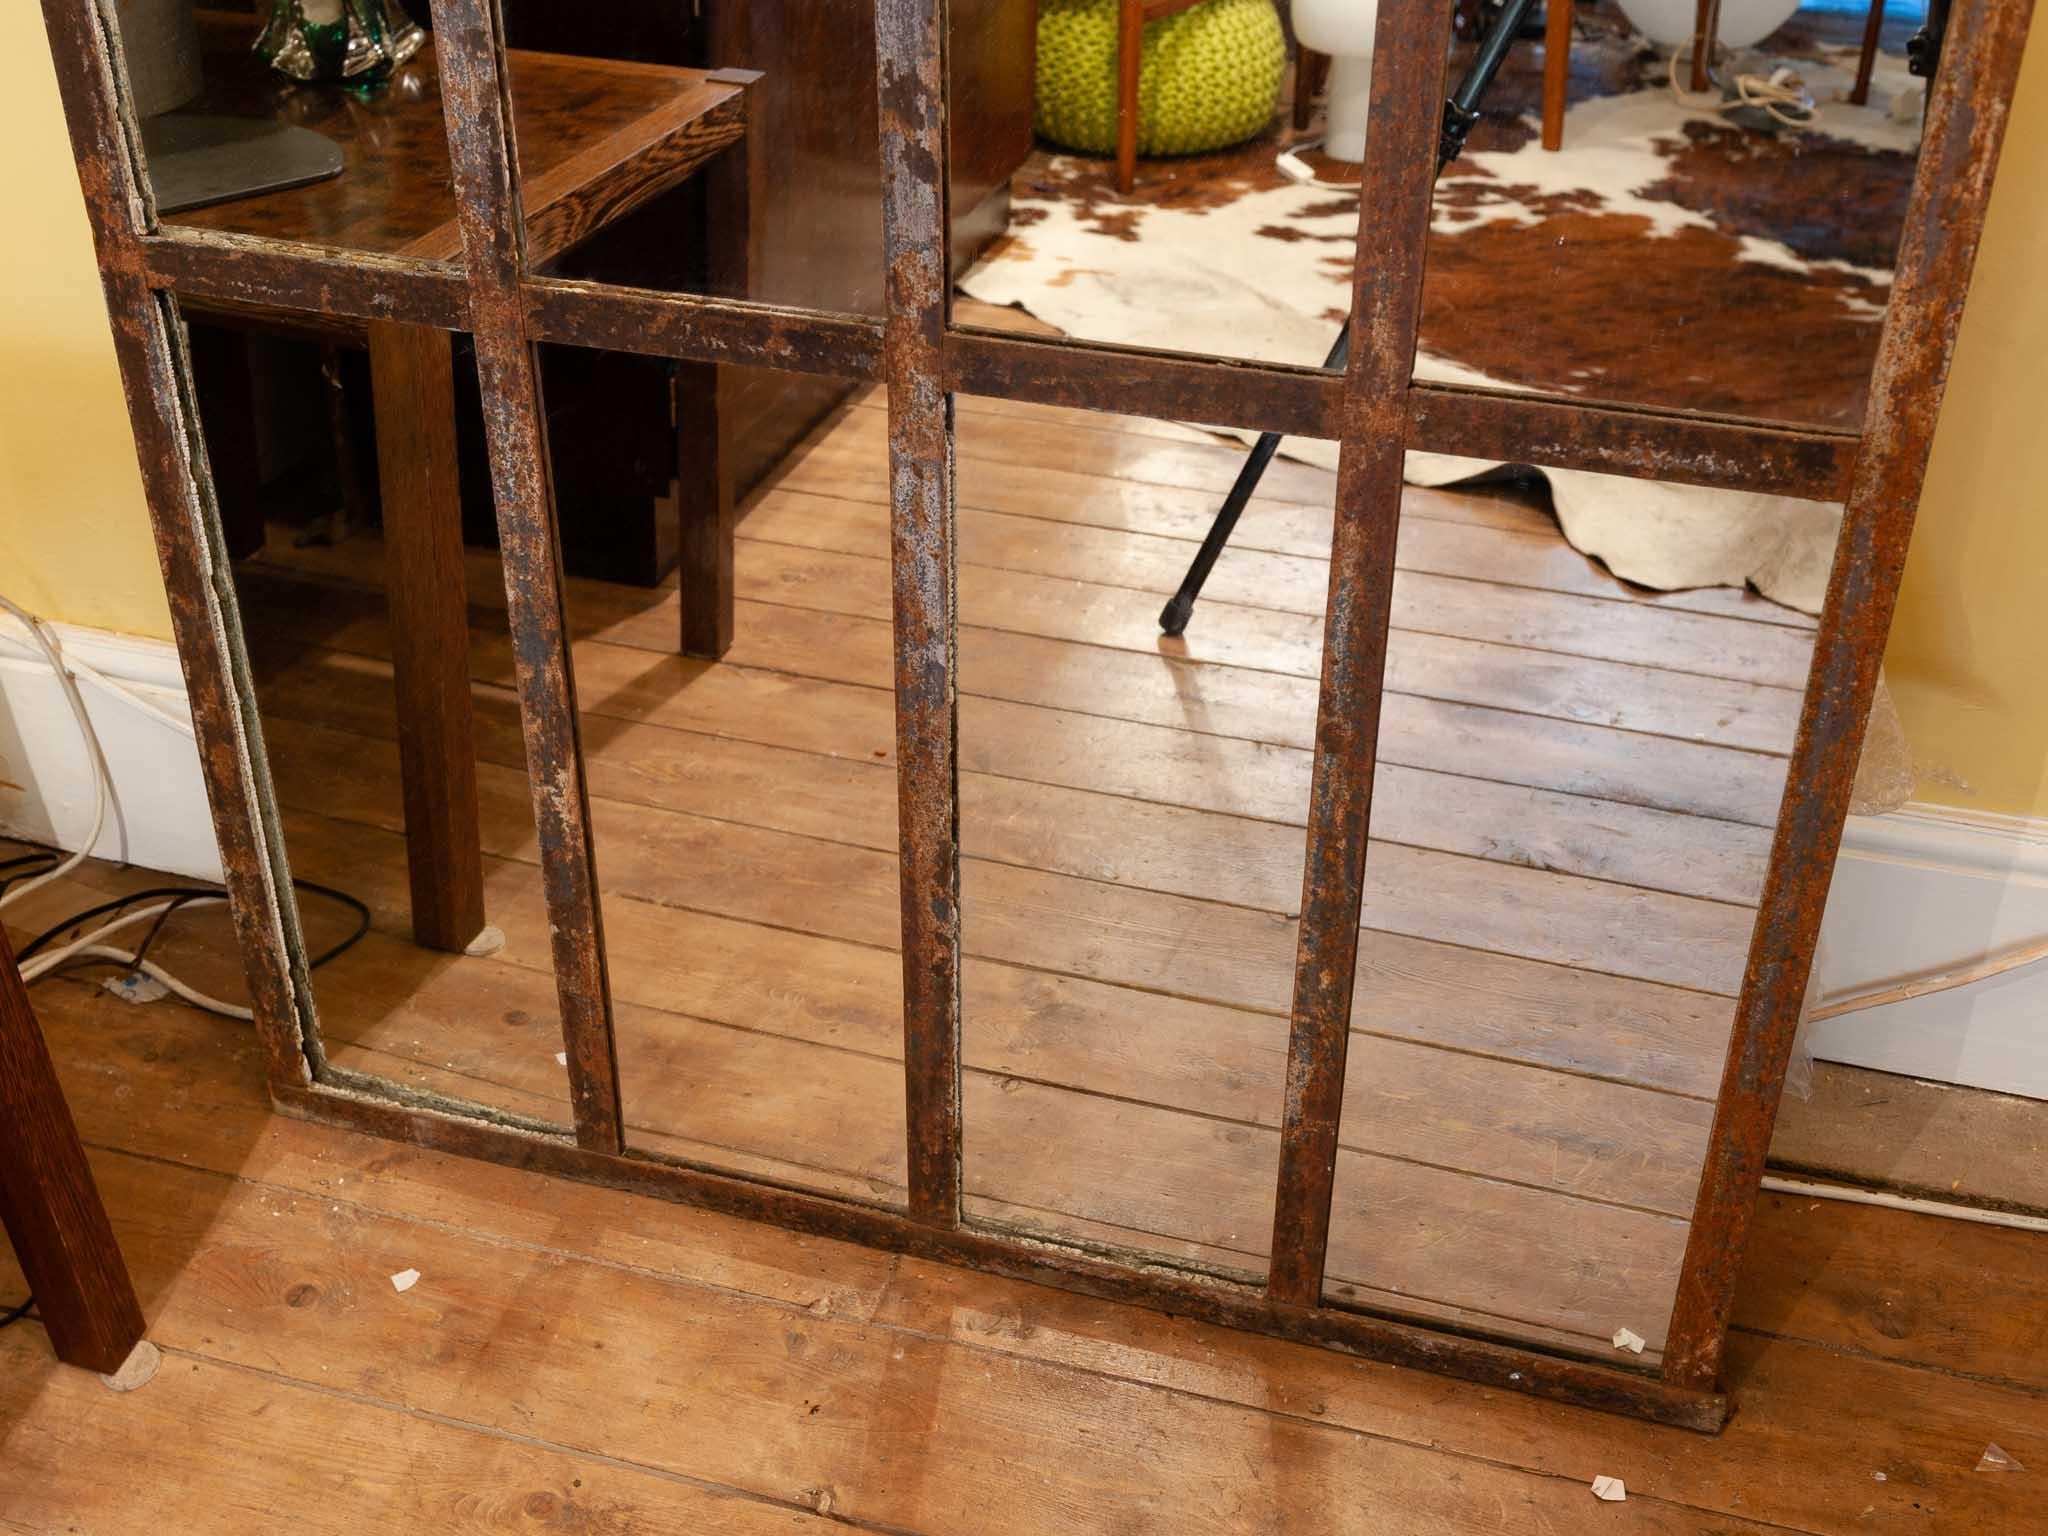 Late Victorian Large Vintage French Rustic Industrial Iron Disused Factory Window Mirror